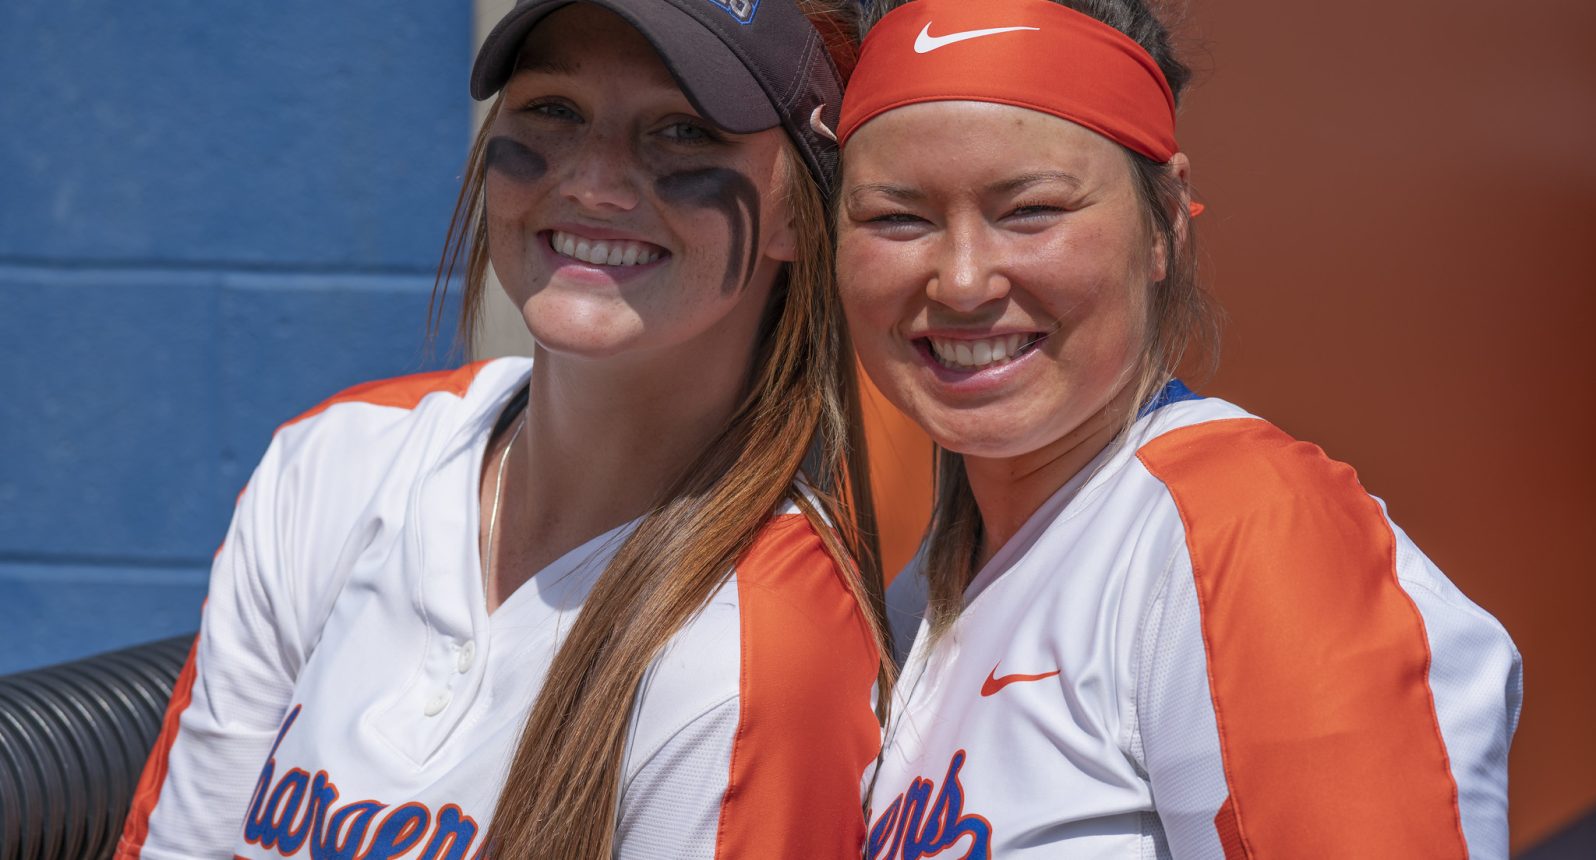 Two GHC softball players smiling at camera.